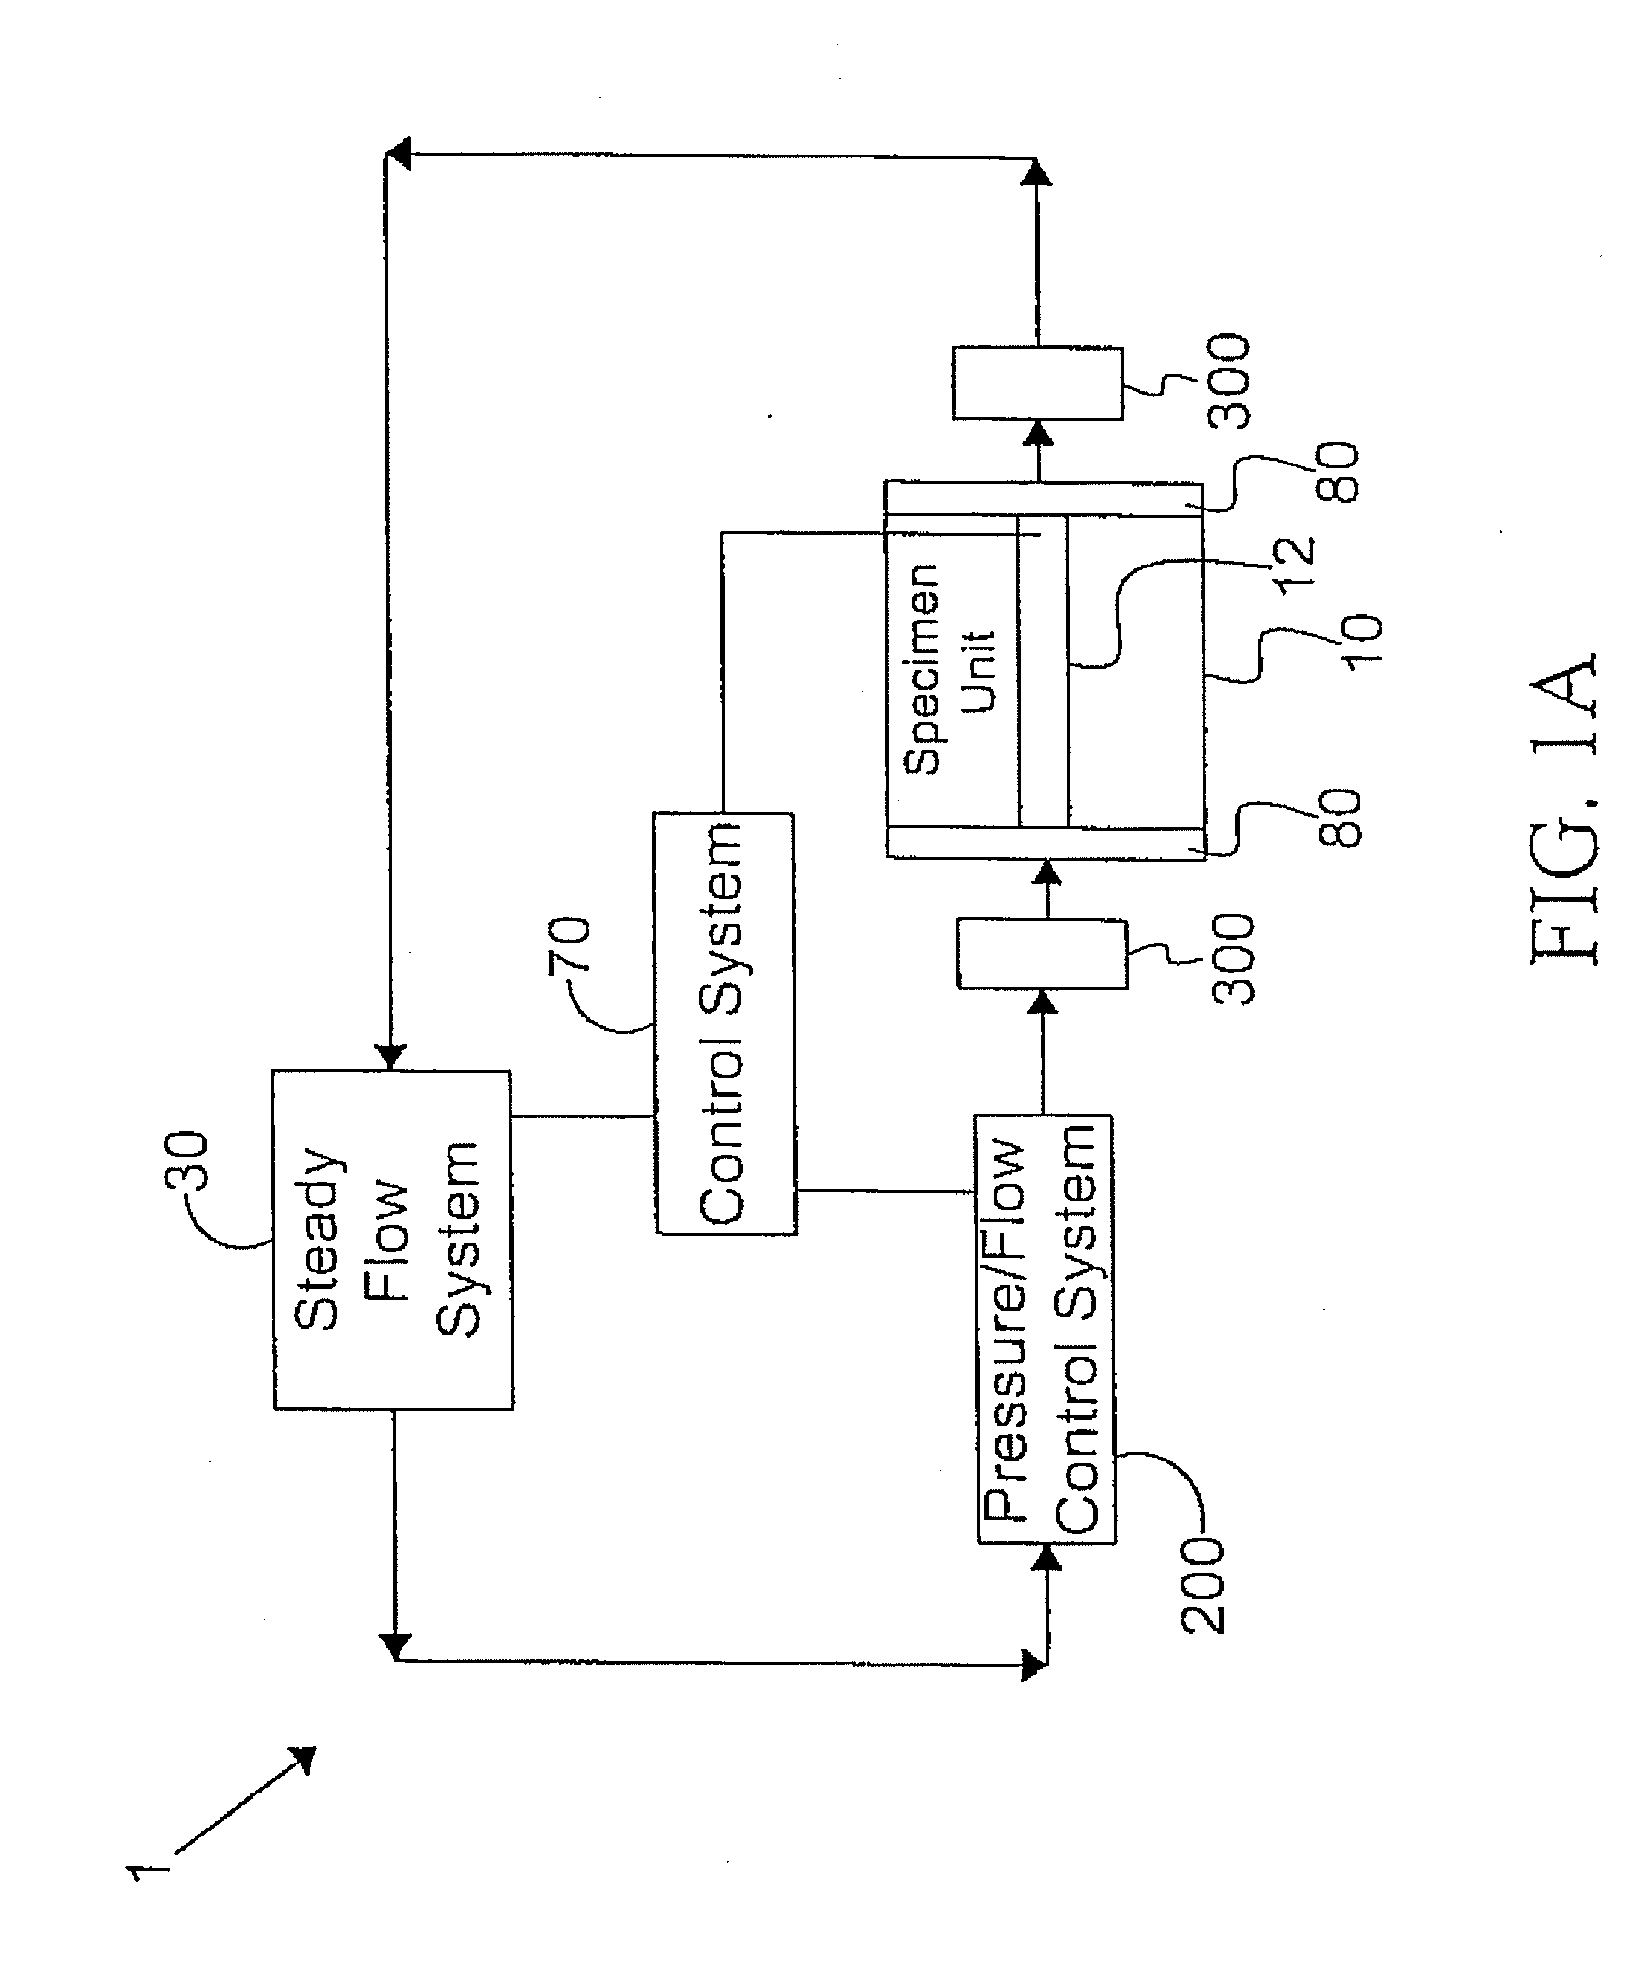 Method of conditioning a hybrid synthetic tubular structure to yeild a functional human hybrid hemodialysis access graft